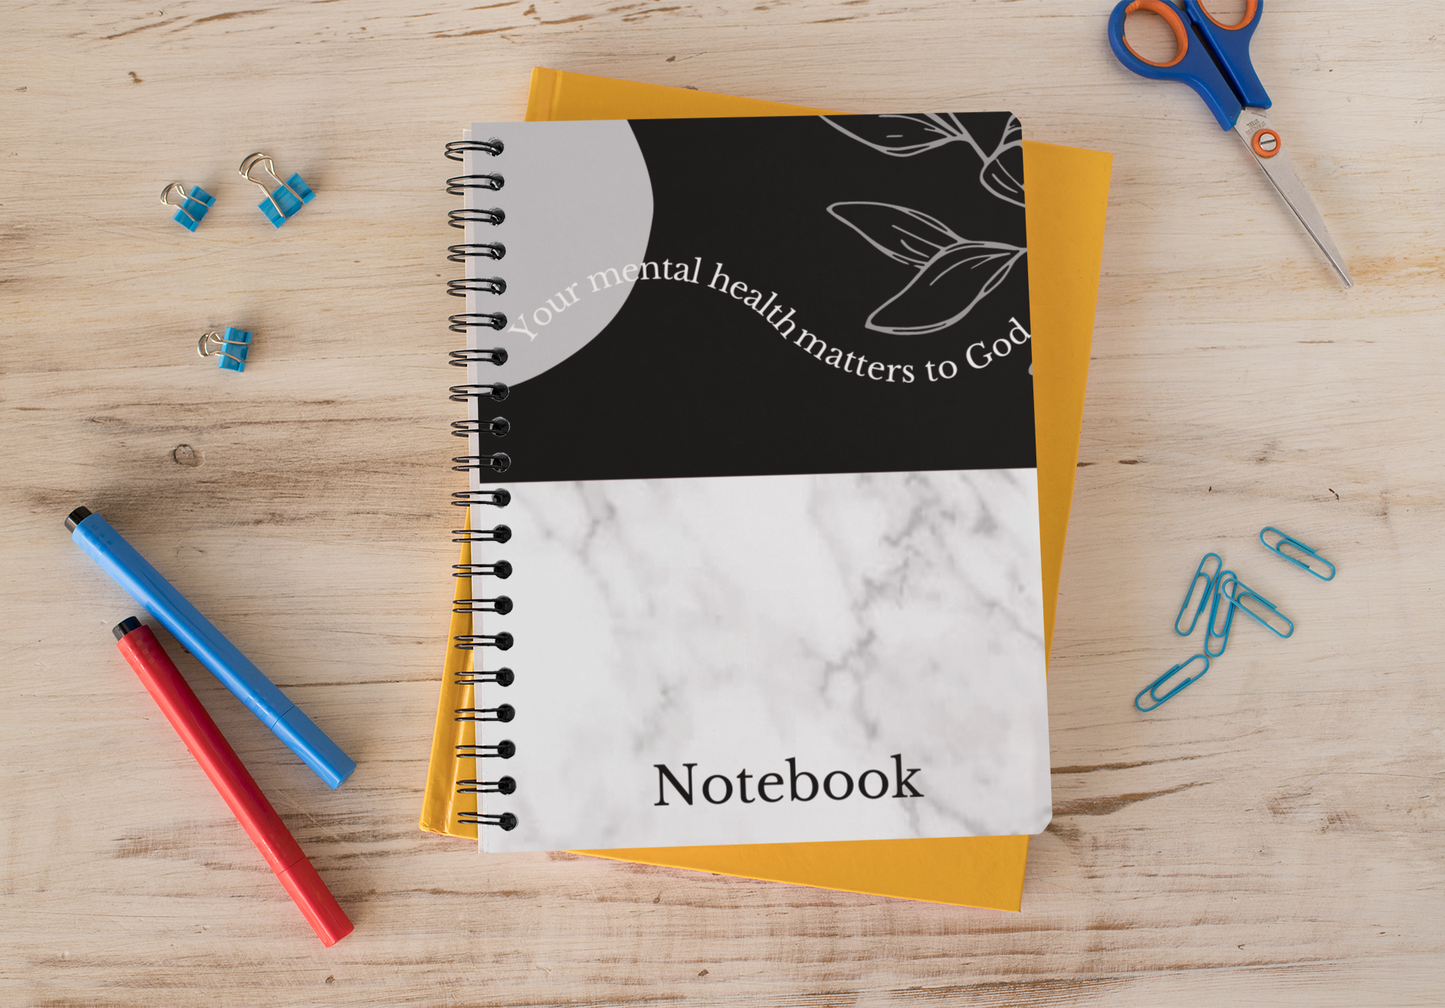 Your Mental Health Matters To God Notebook